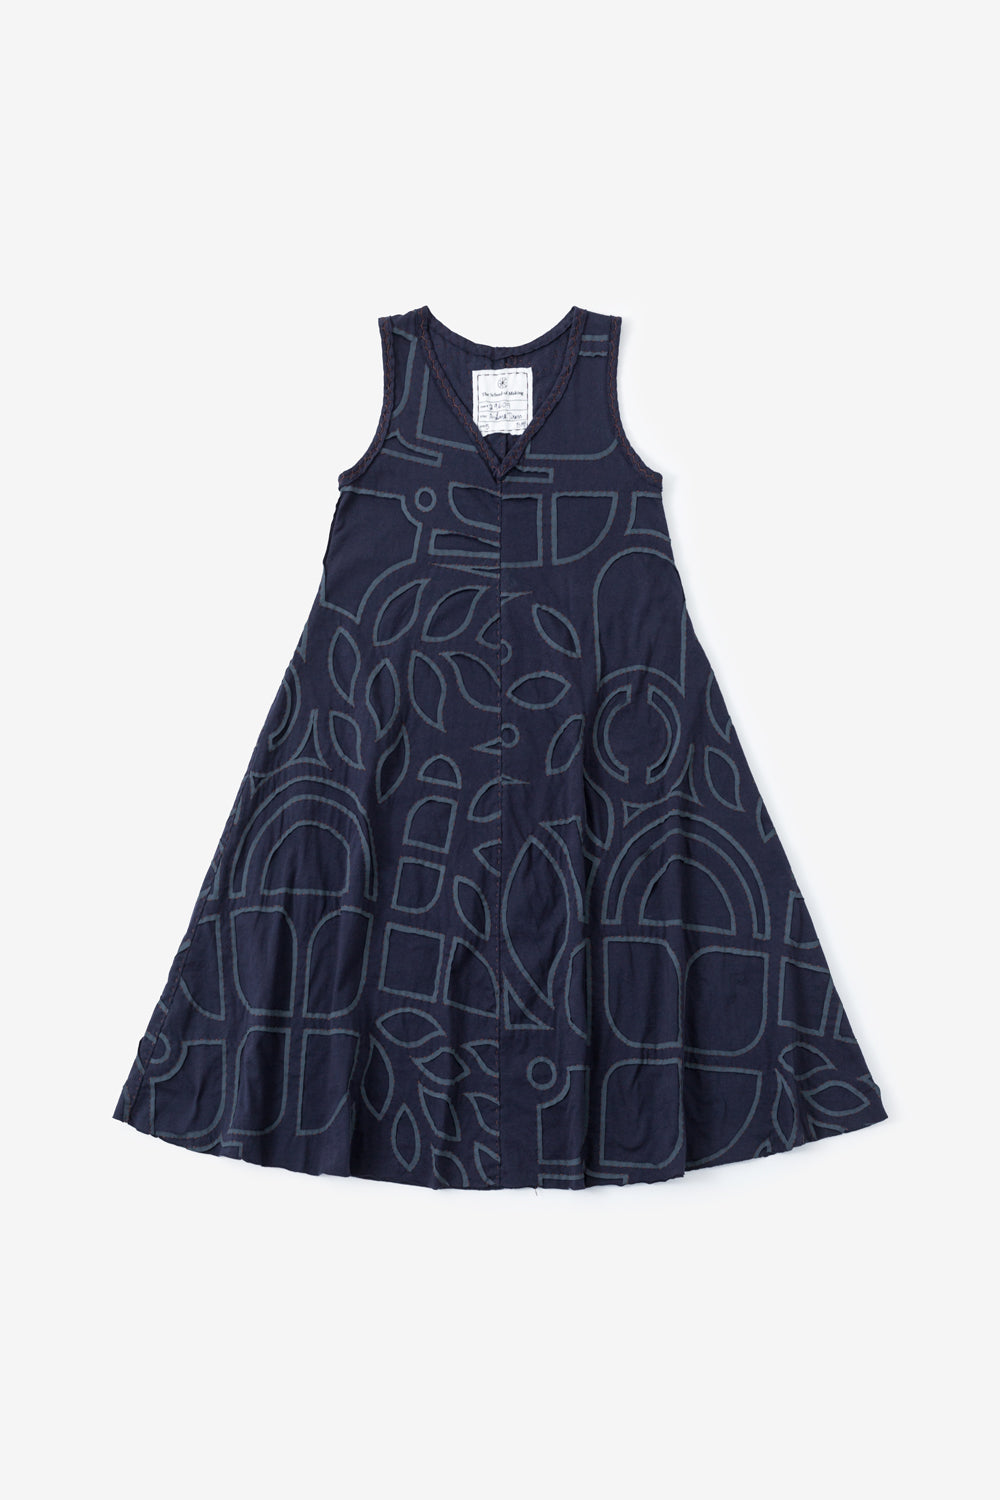 The School of Making A-Line Dress Kit in Navy with Abstract Applique.